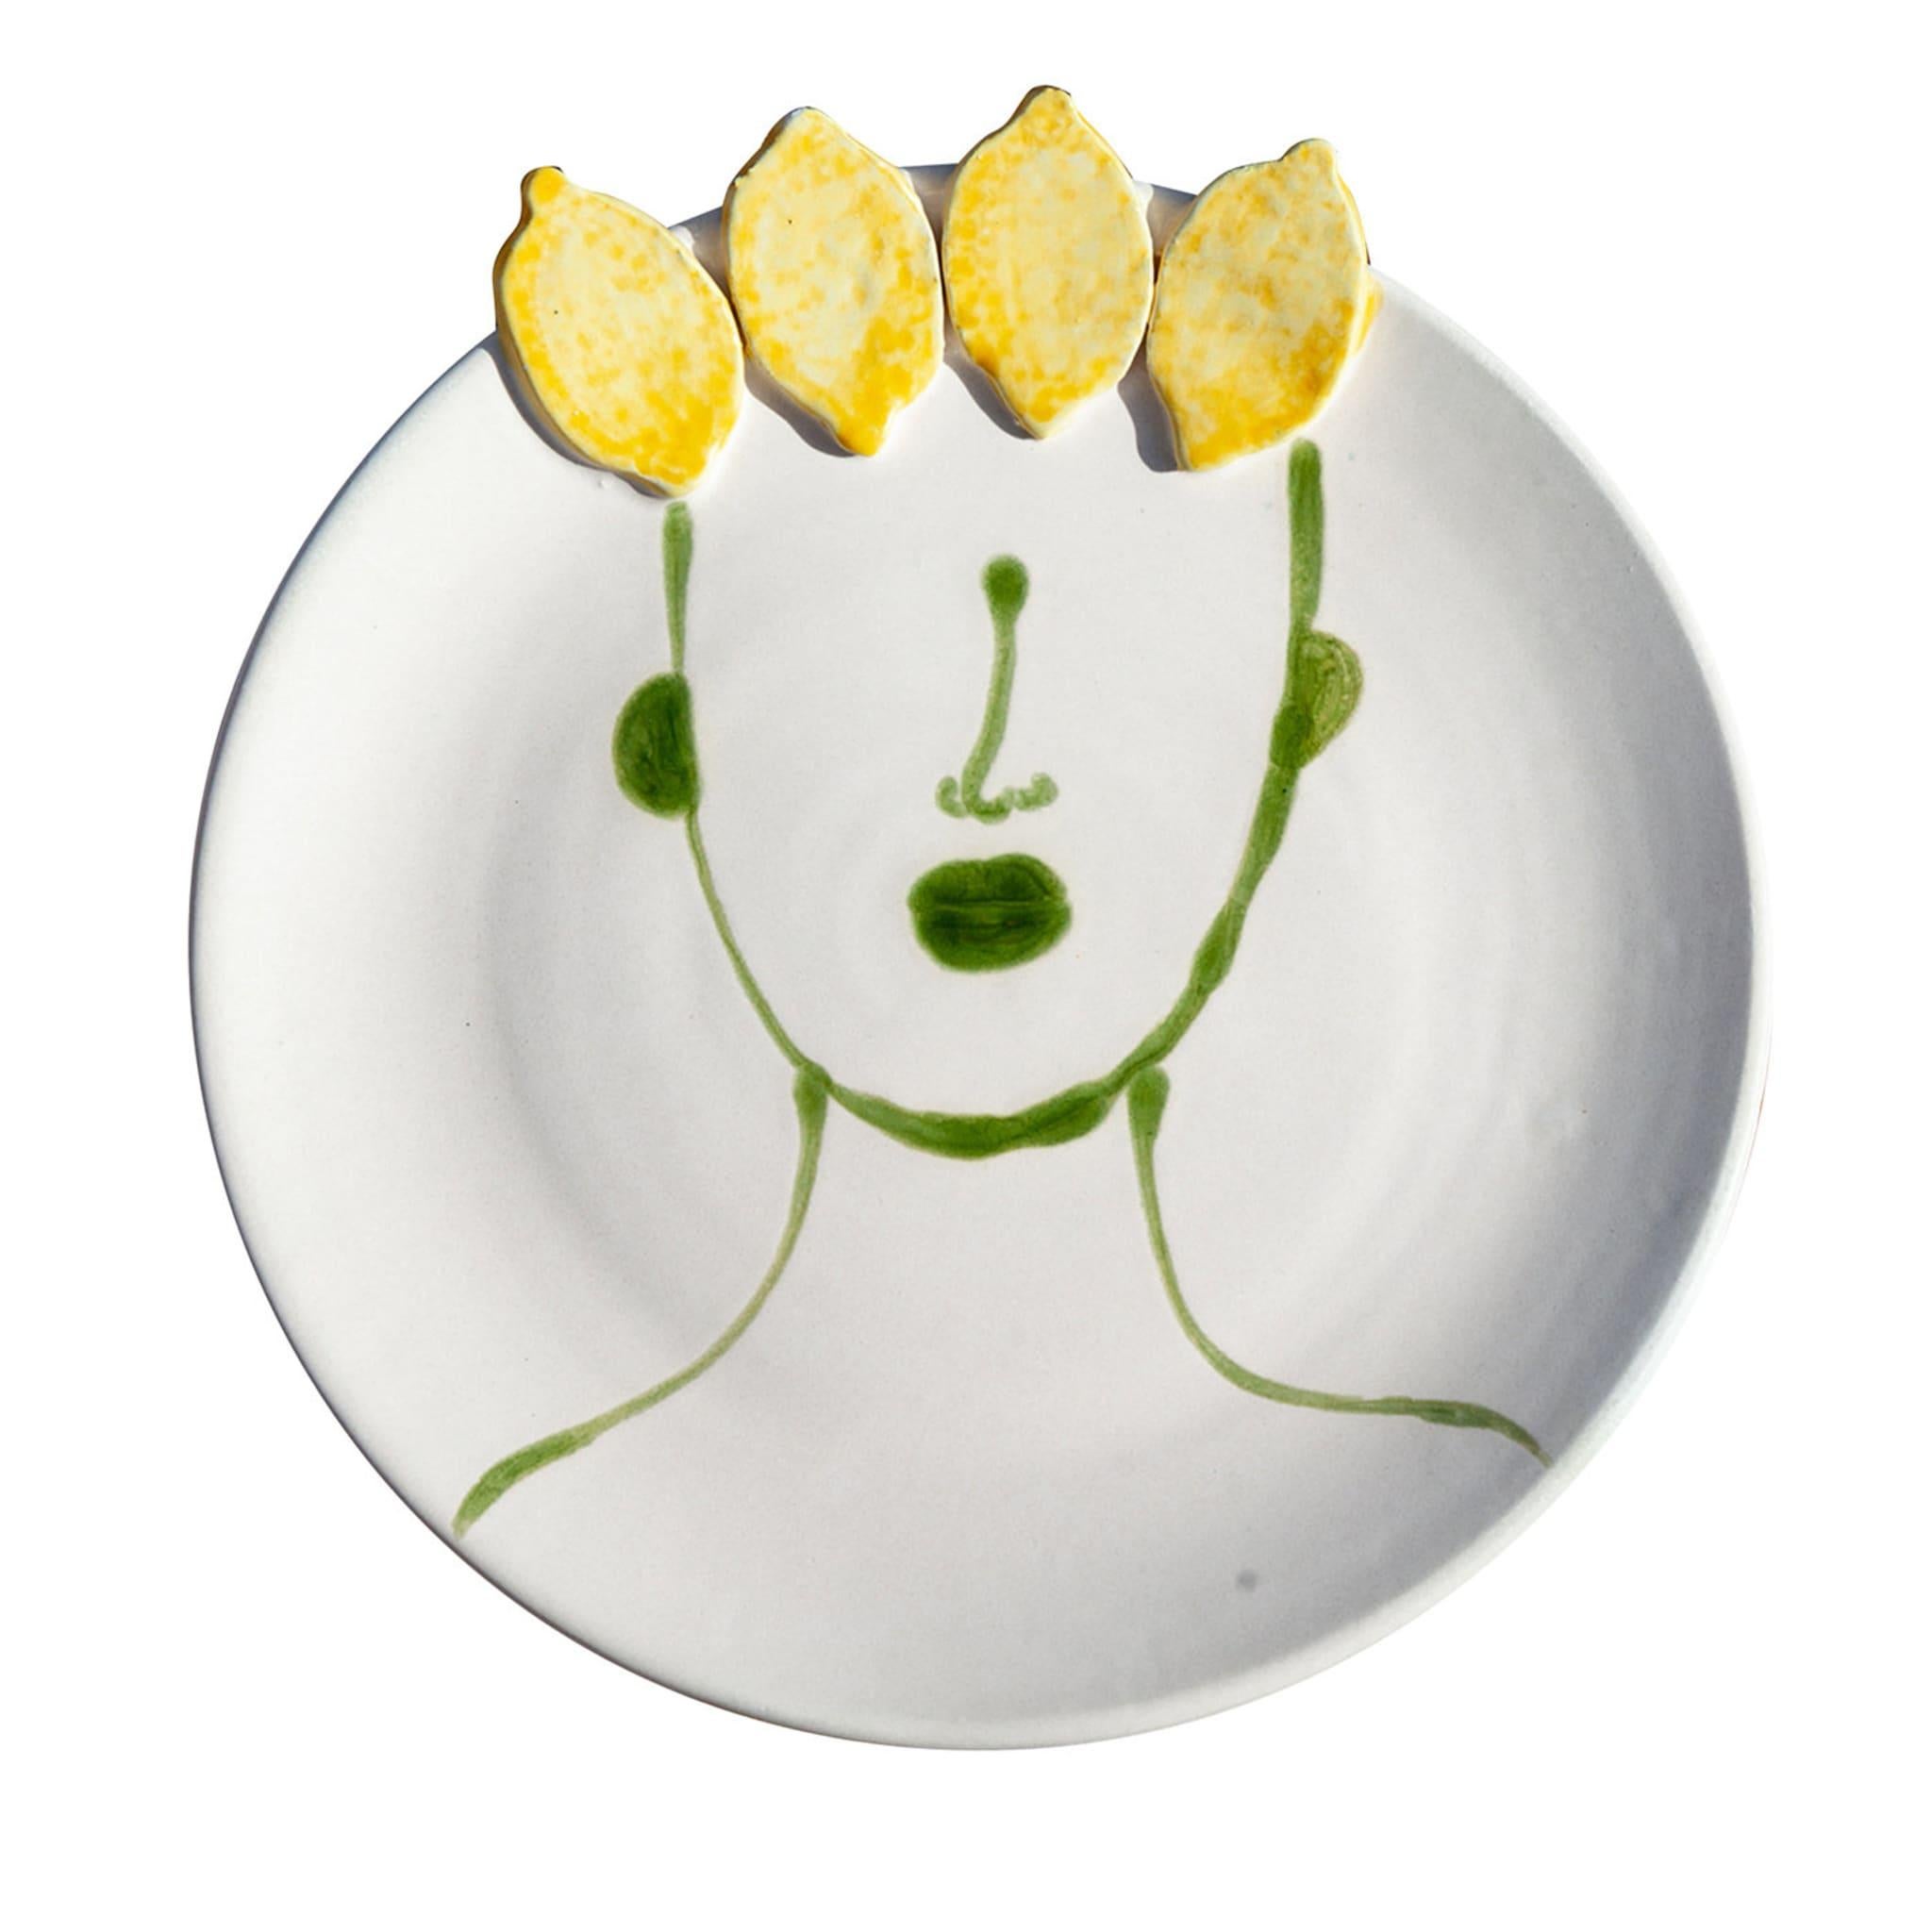 The natural flair of Sicily rendered through masterfully-interpreted symbols and striking artistic sensibility: this set of two ceramic dinner plates glazed in matte white boast the green decoration of a stylized human profile, their hair rendered